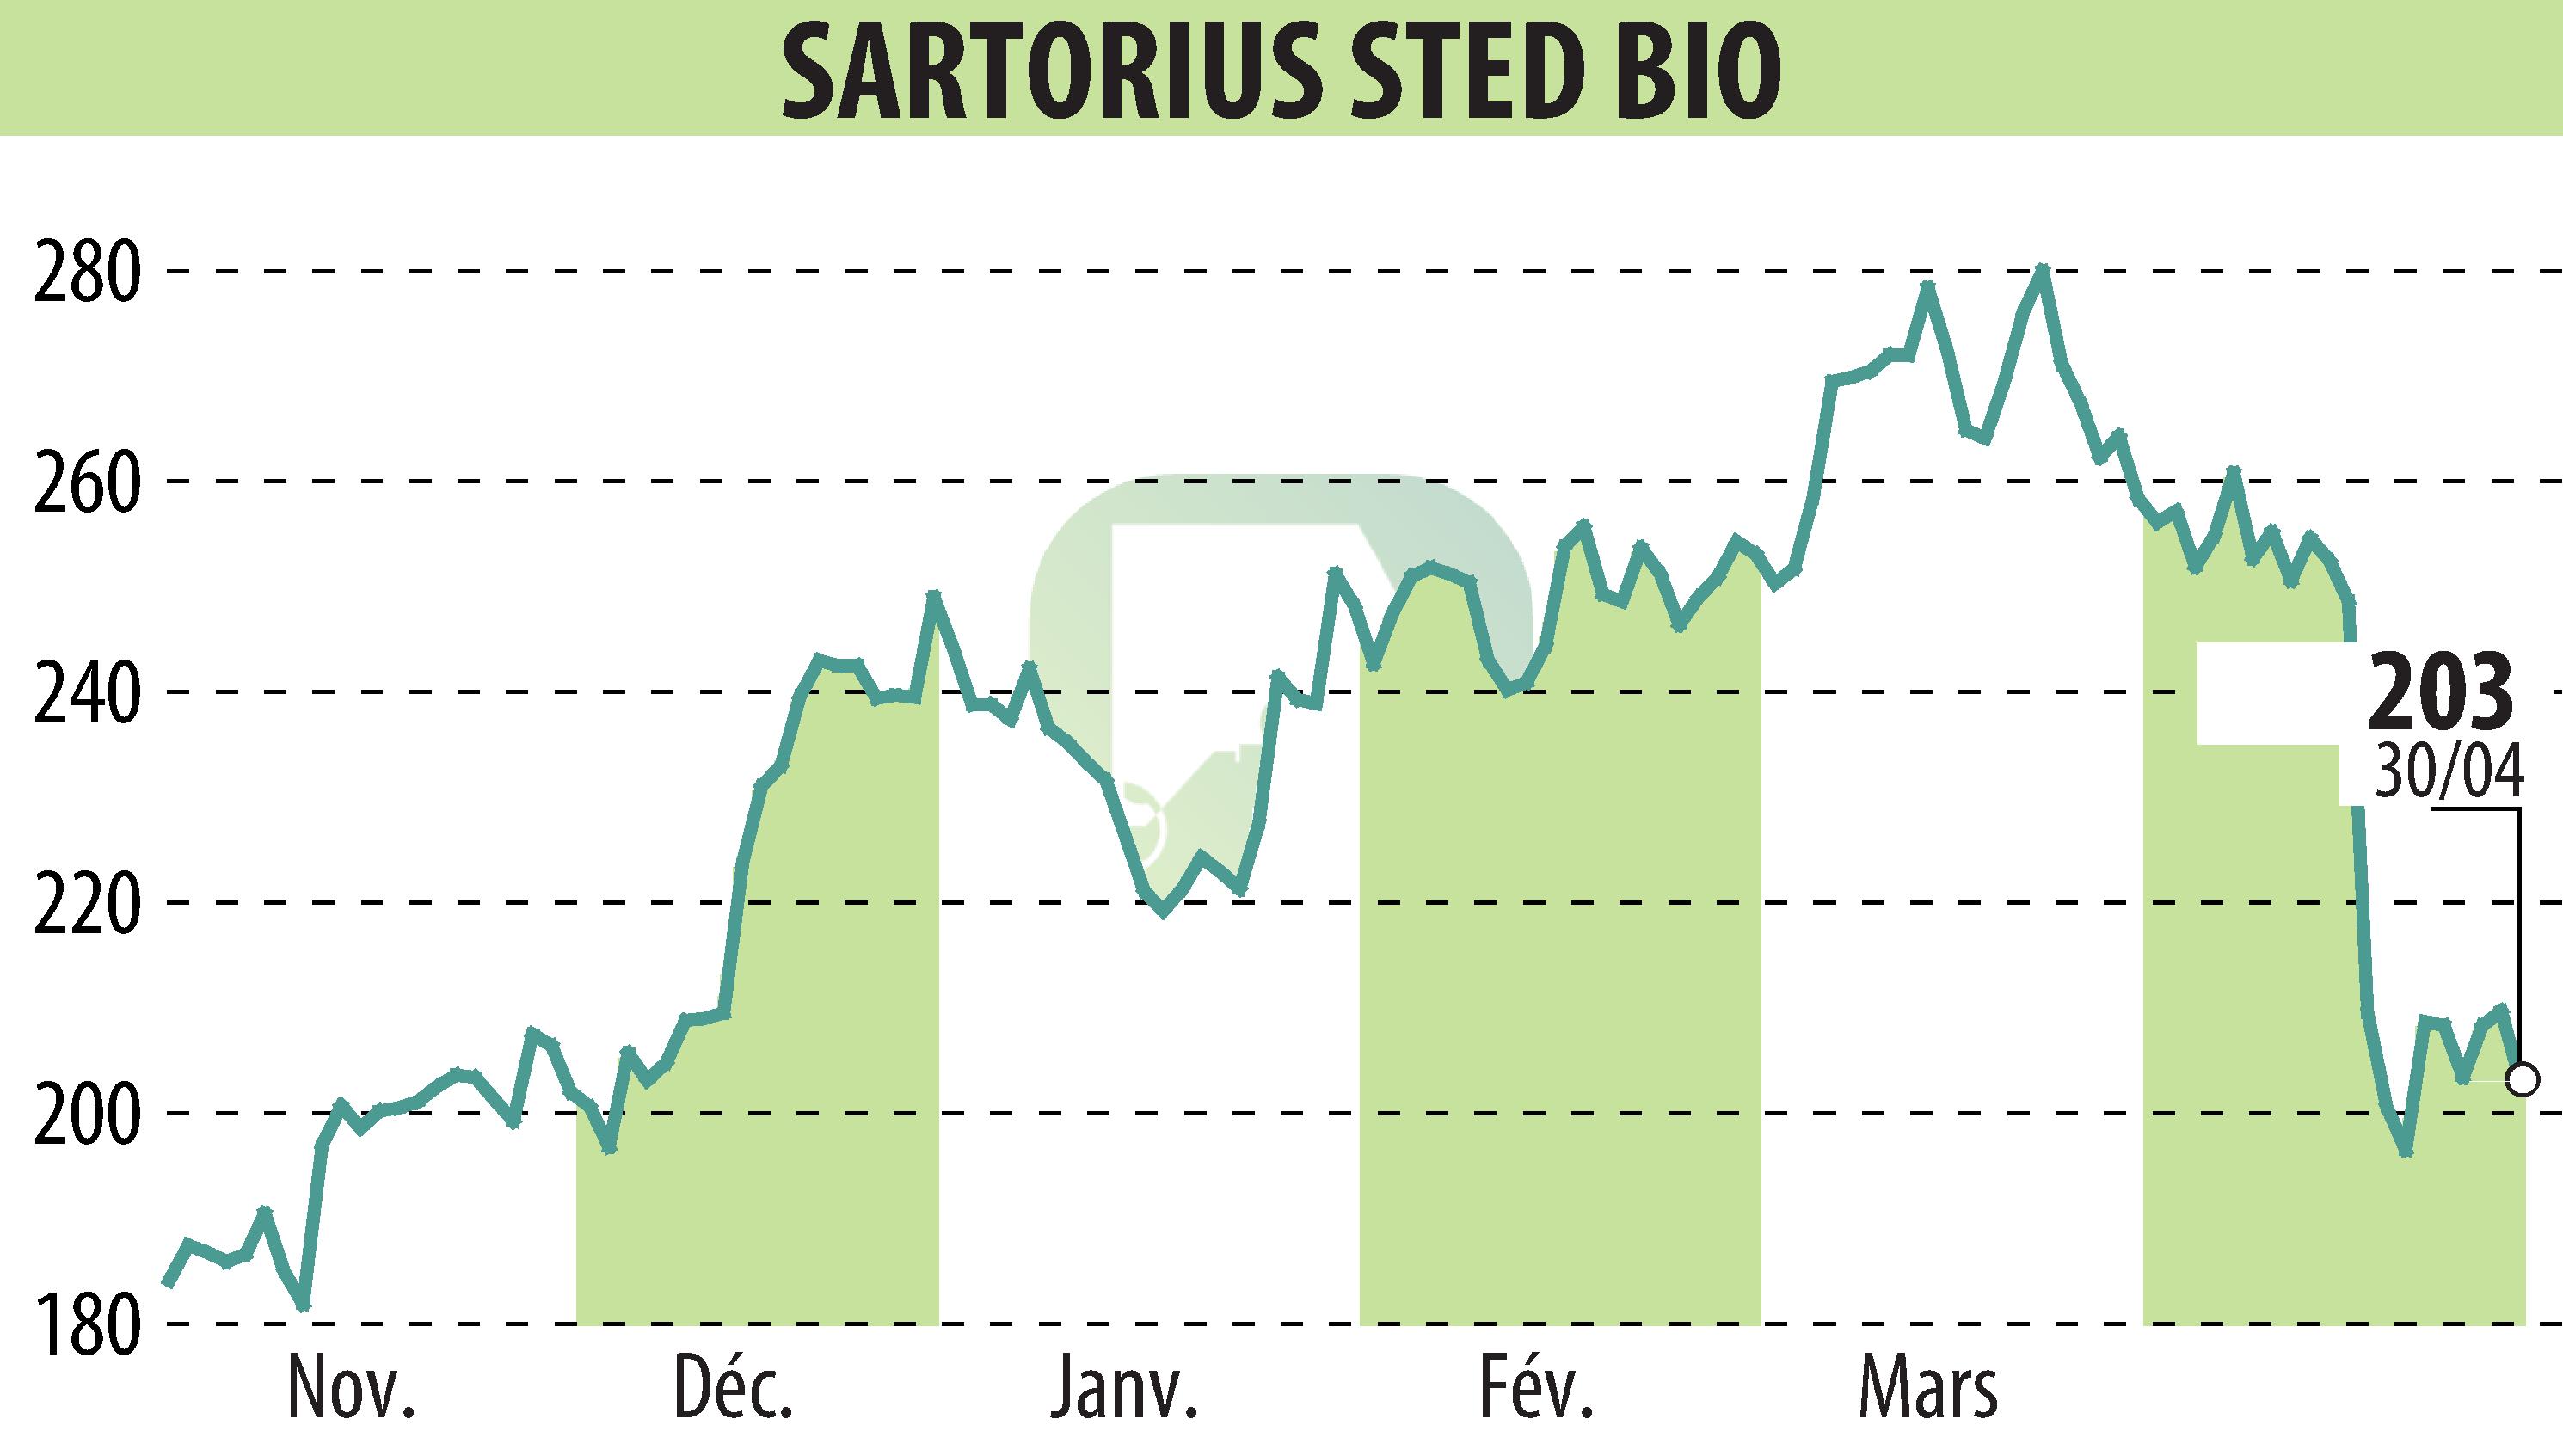 Stock price chart of SARTORIUS STED BIO (EPA:DIM) showing fluctuations.